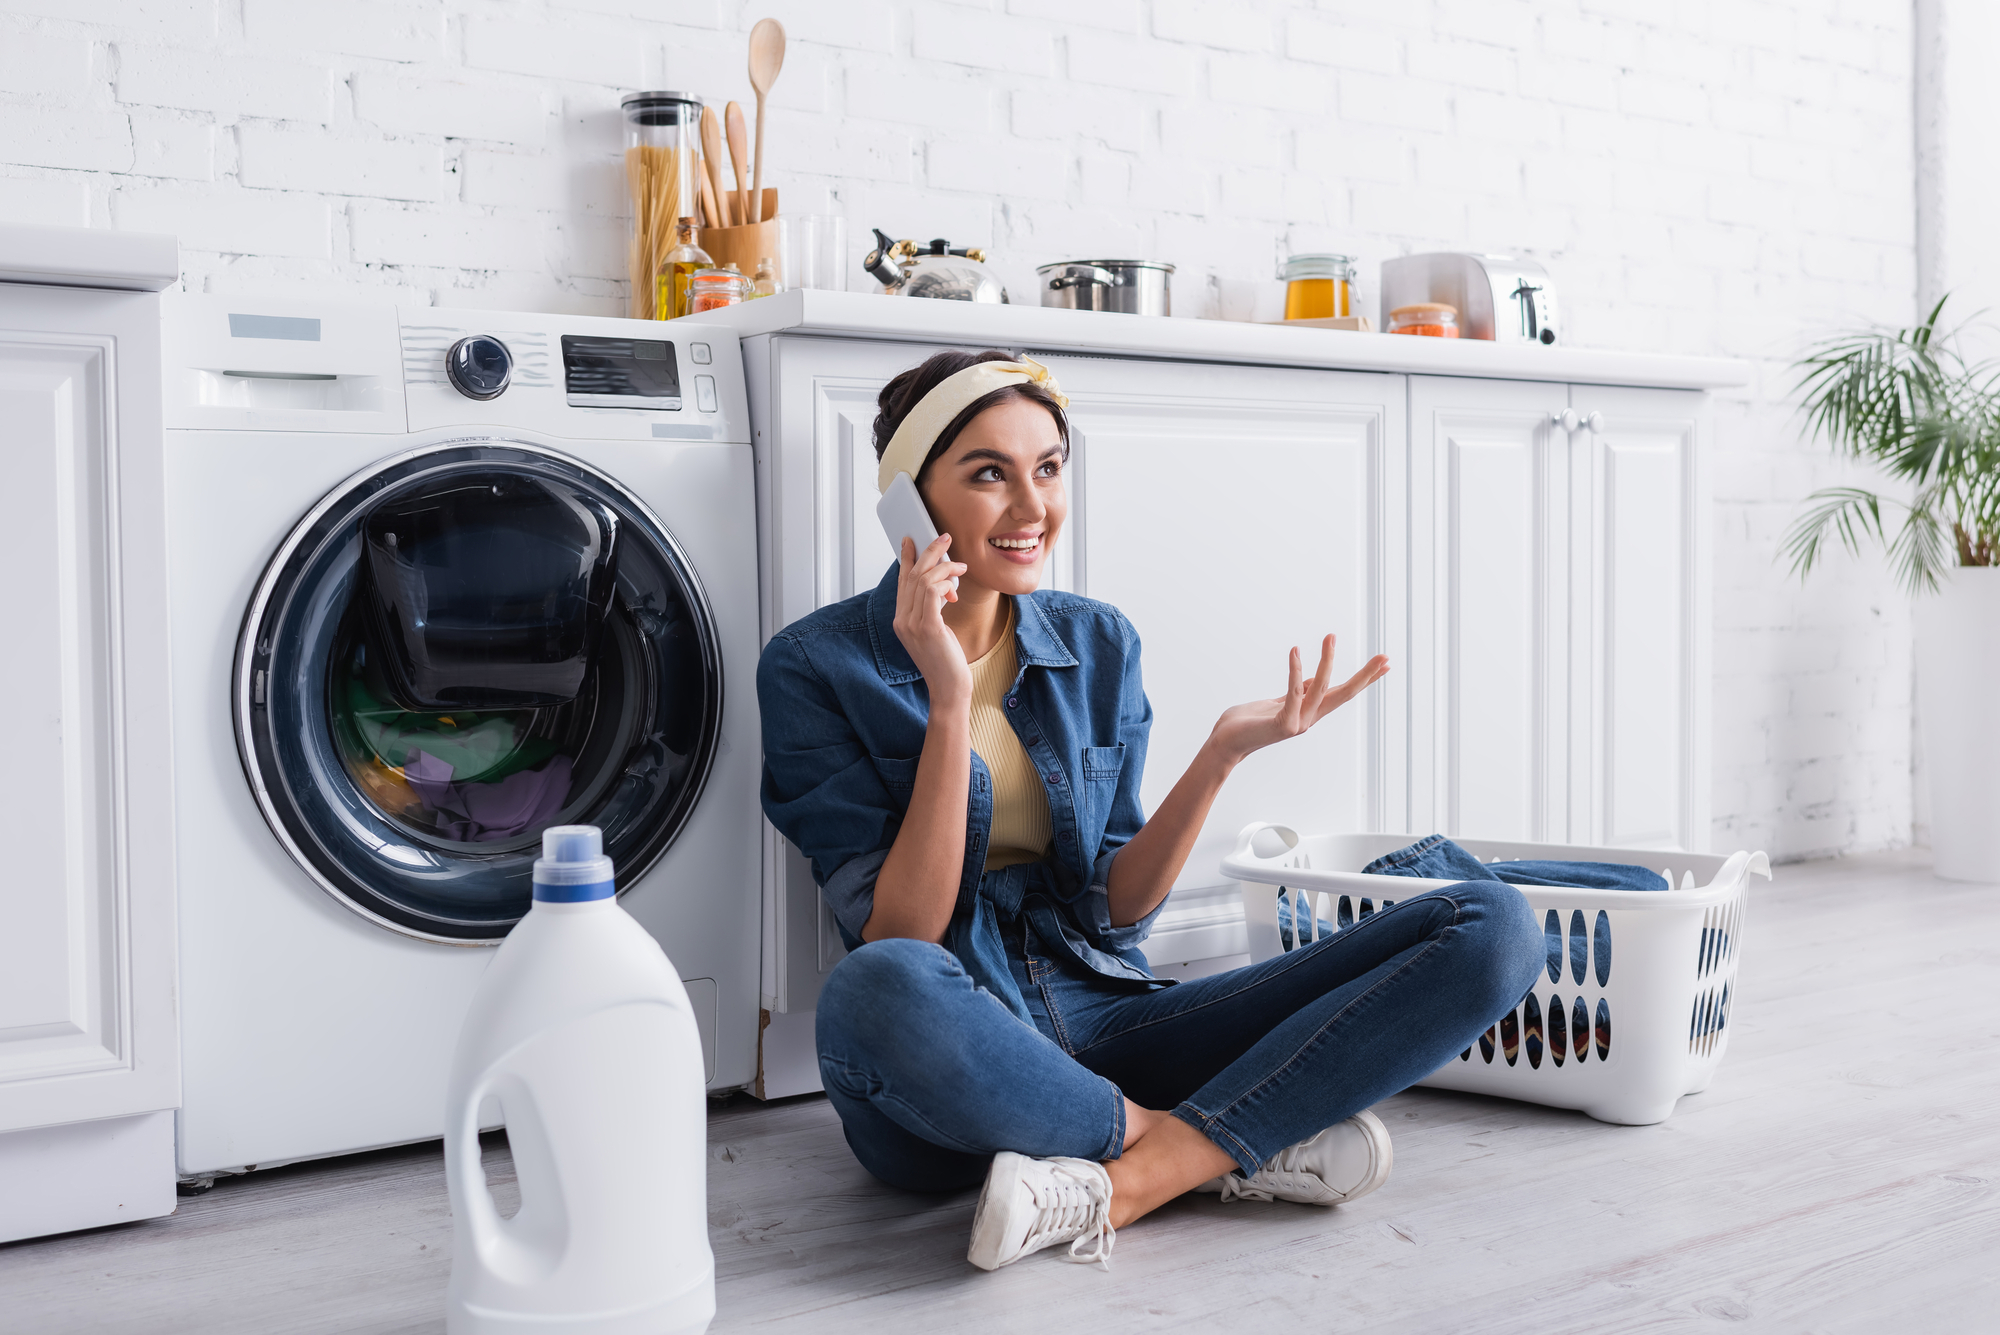 Smiling housewife talking on smartphone near detergent and washing machine in kitchen.jpg